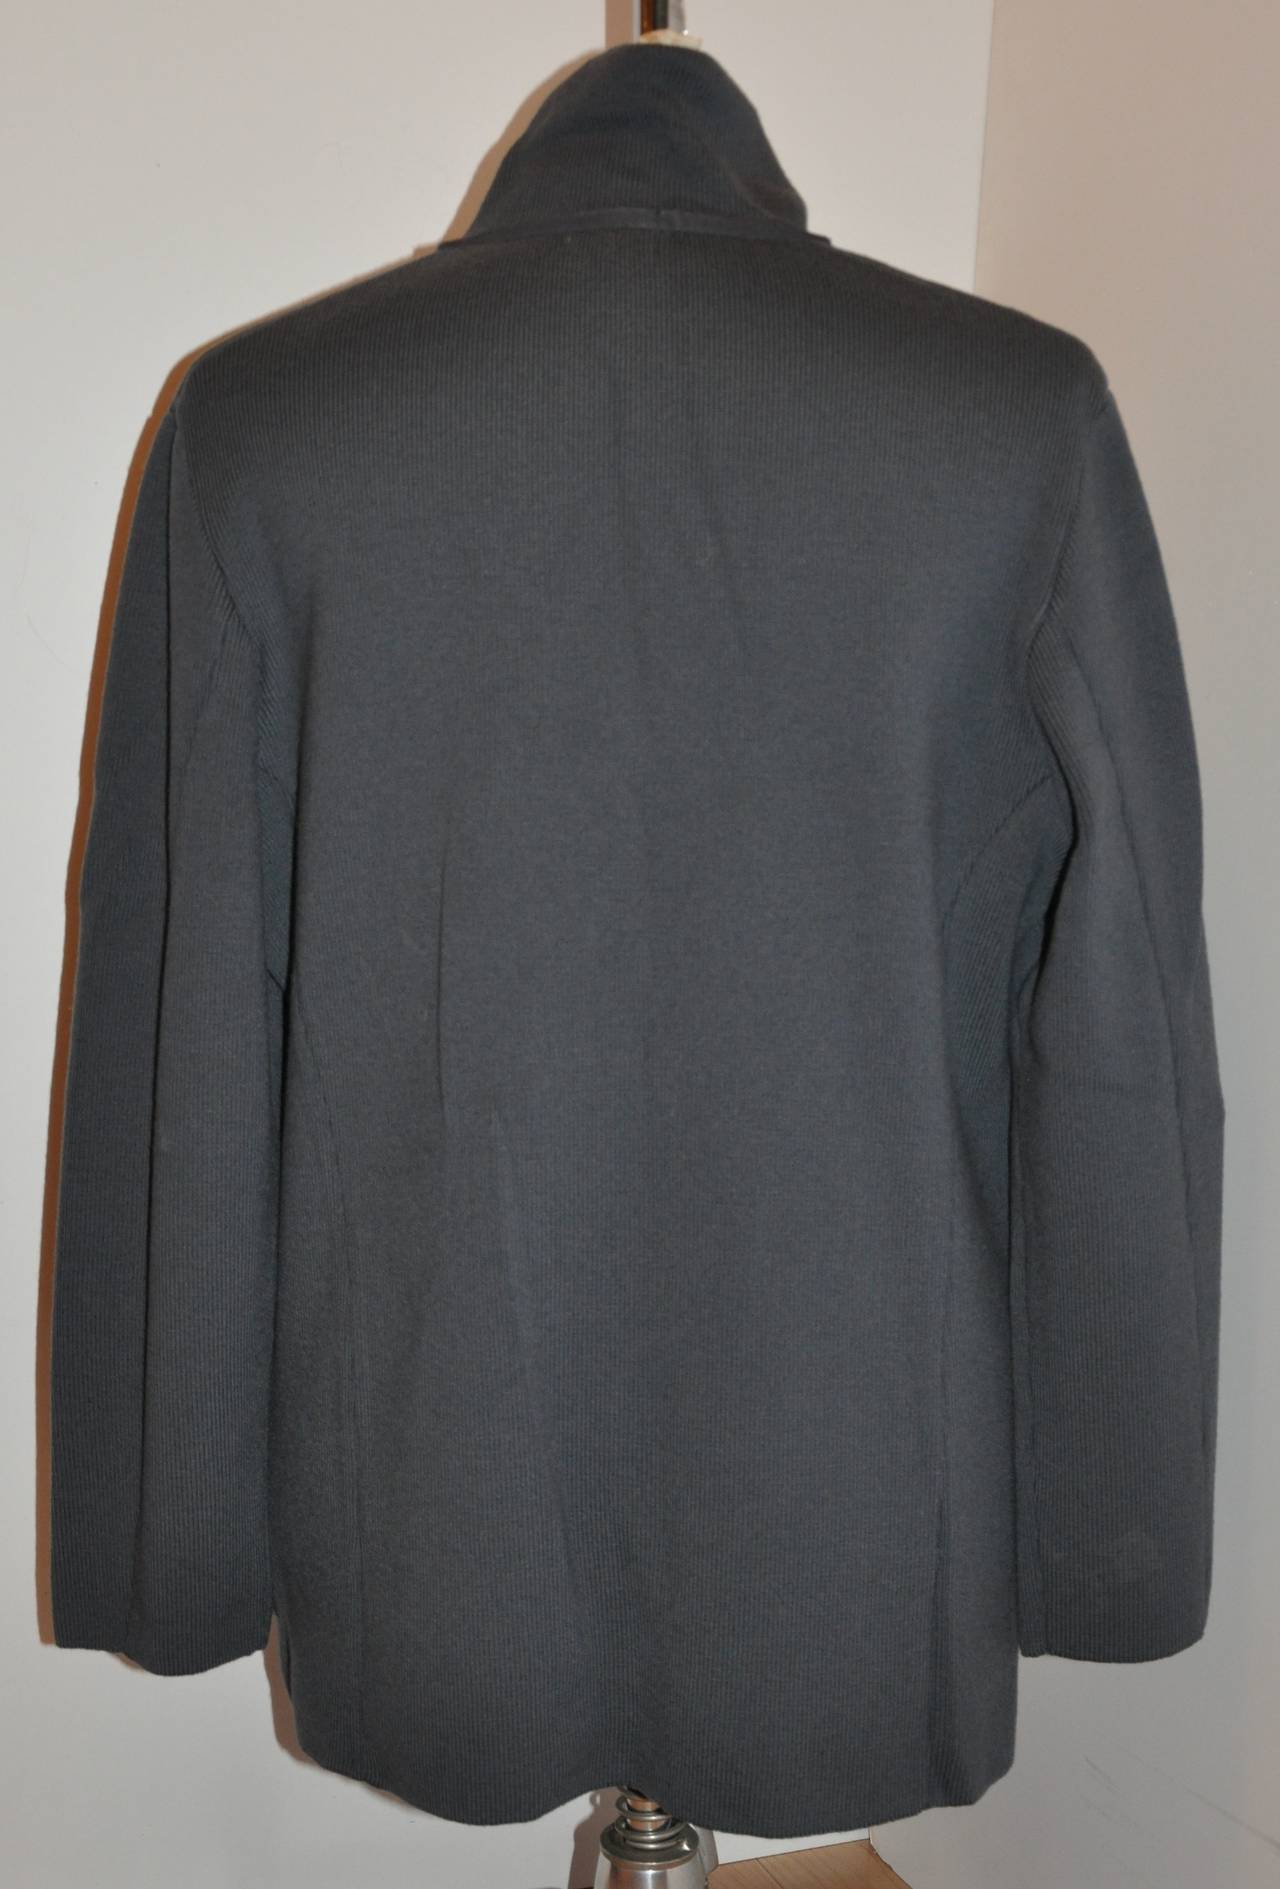 Gianfranco Ferre wonderfully tailored men's gray medium-weight wool-blend sweater-jacket is detailed with two(2) front patch pockets. The shoulders are slightly draped with the shoulders measuring 19 1/2